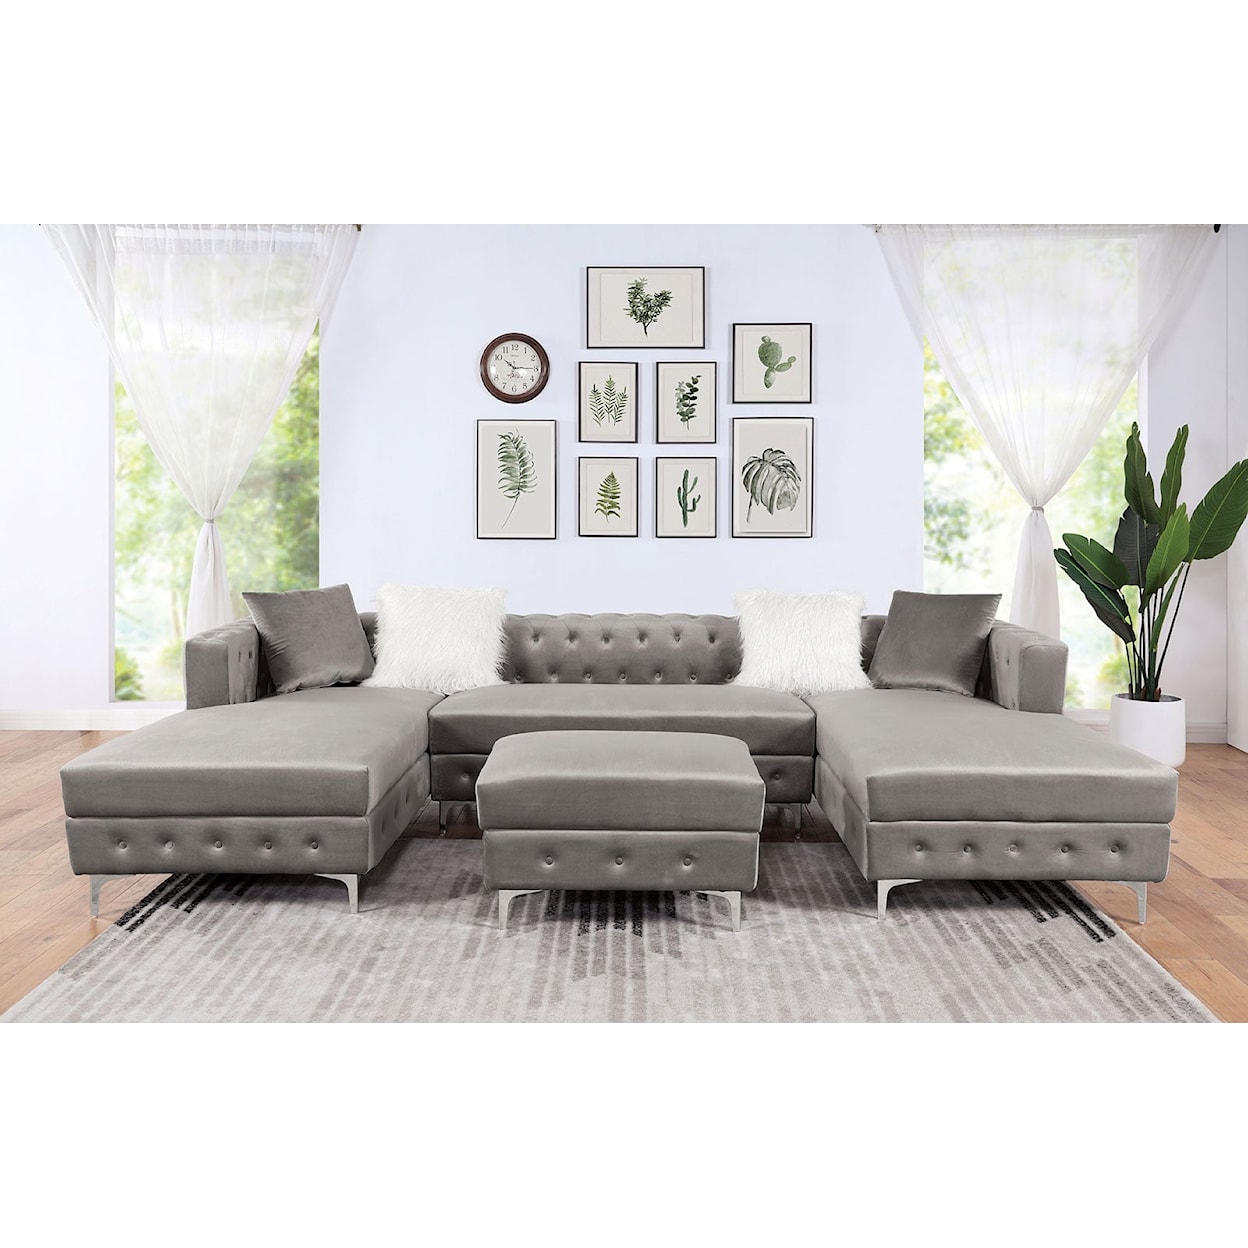 Furniture of America Ciabattoni Sectional with Ottoman